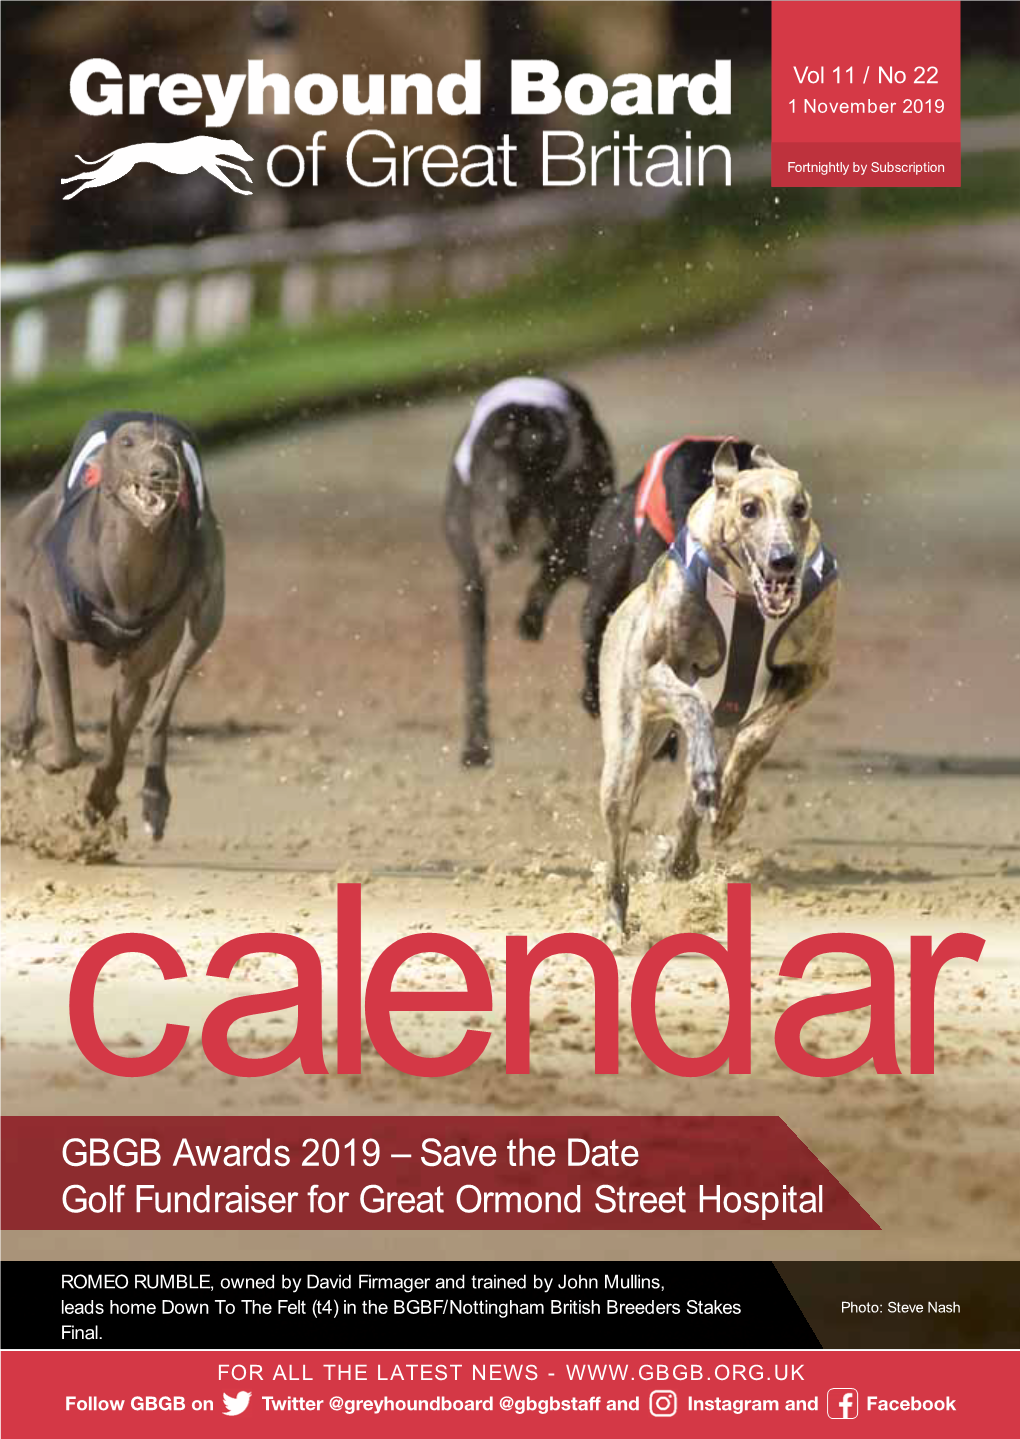 GBGB Awards 2019 – Save the Date Golf Fundraiser for Great Ormond Street Hospital